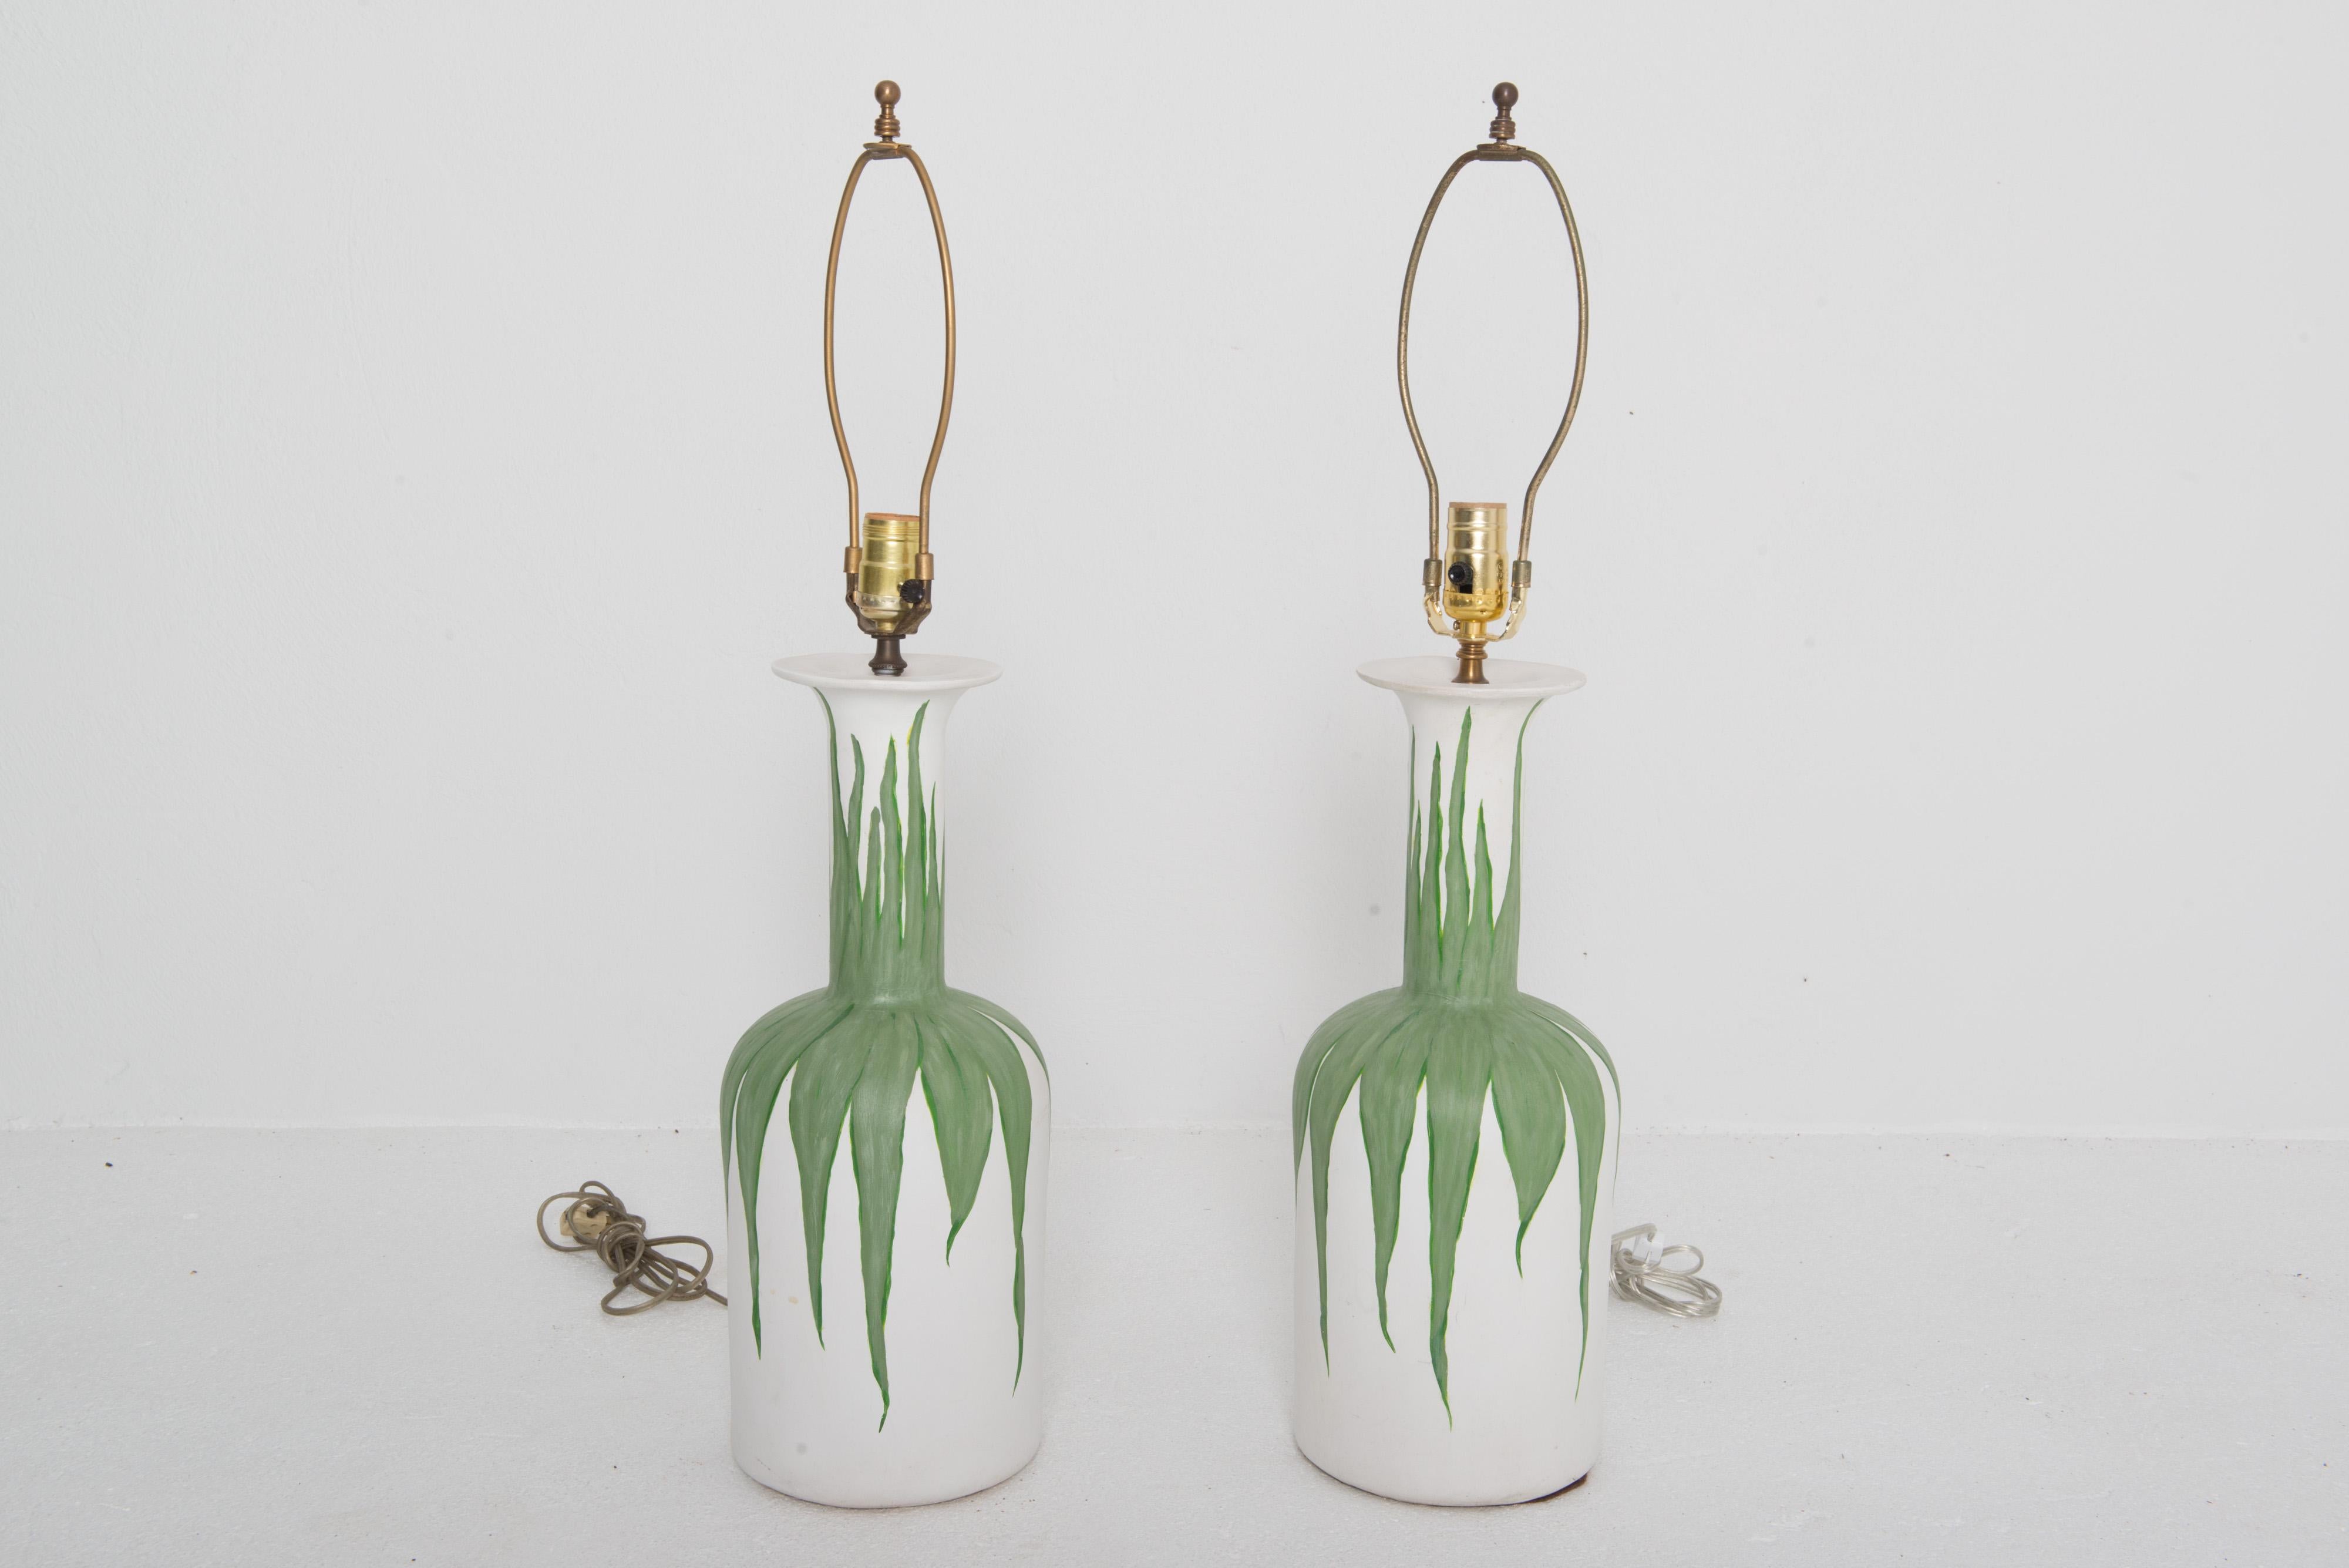 Pair of organic modern hand painted green foliated white plaster lamps. 
Large scale. Includes harps and finial. No shades.